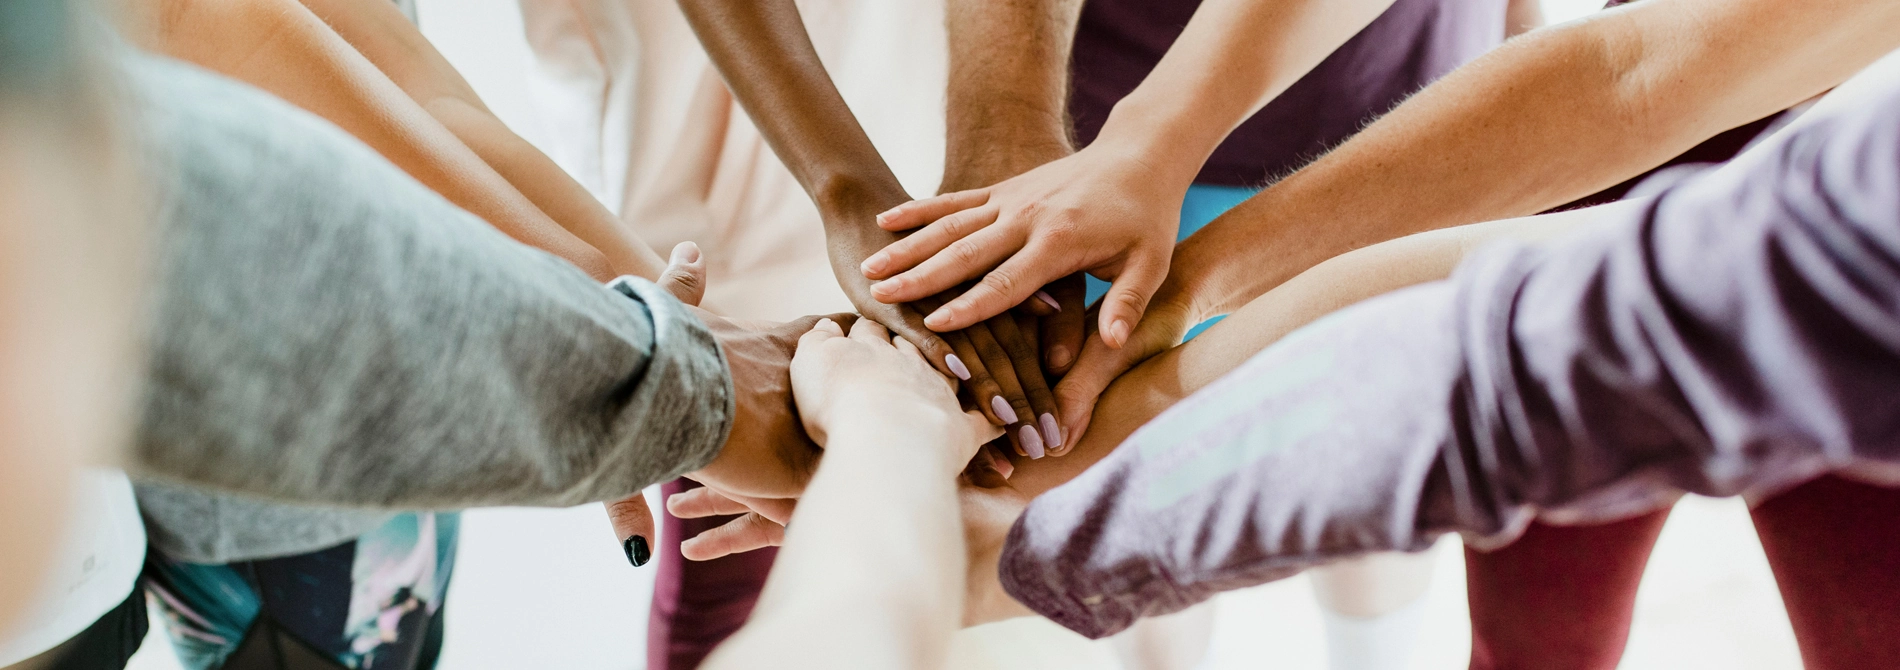 group of people piling hands together